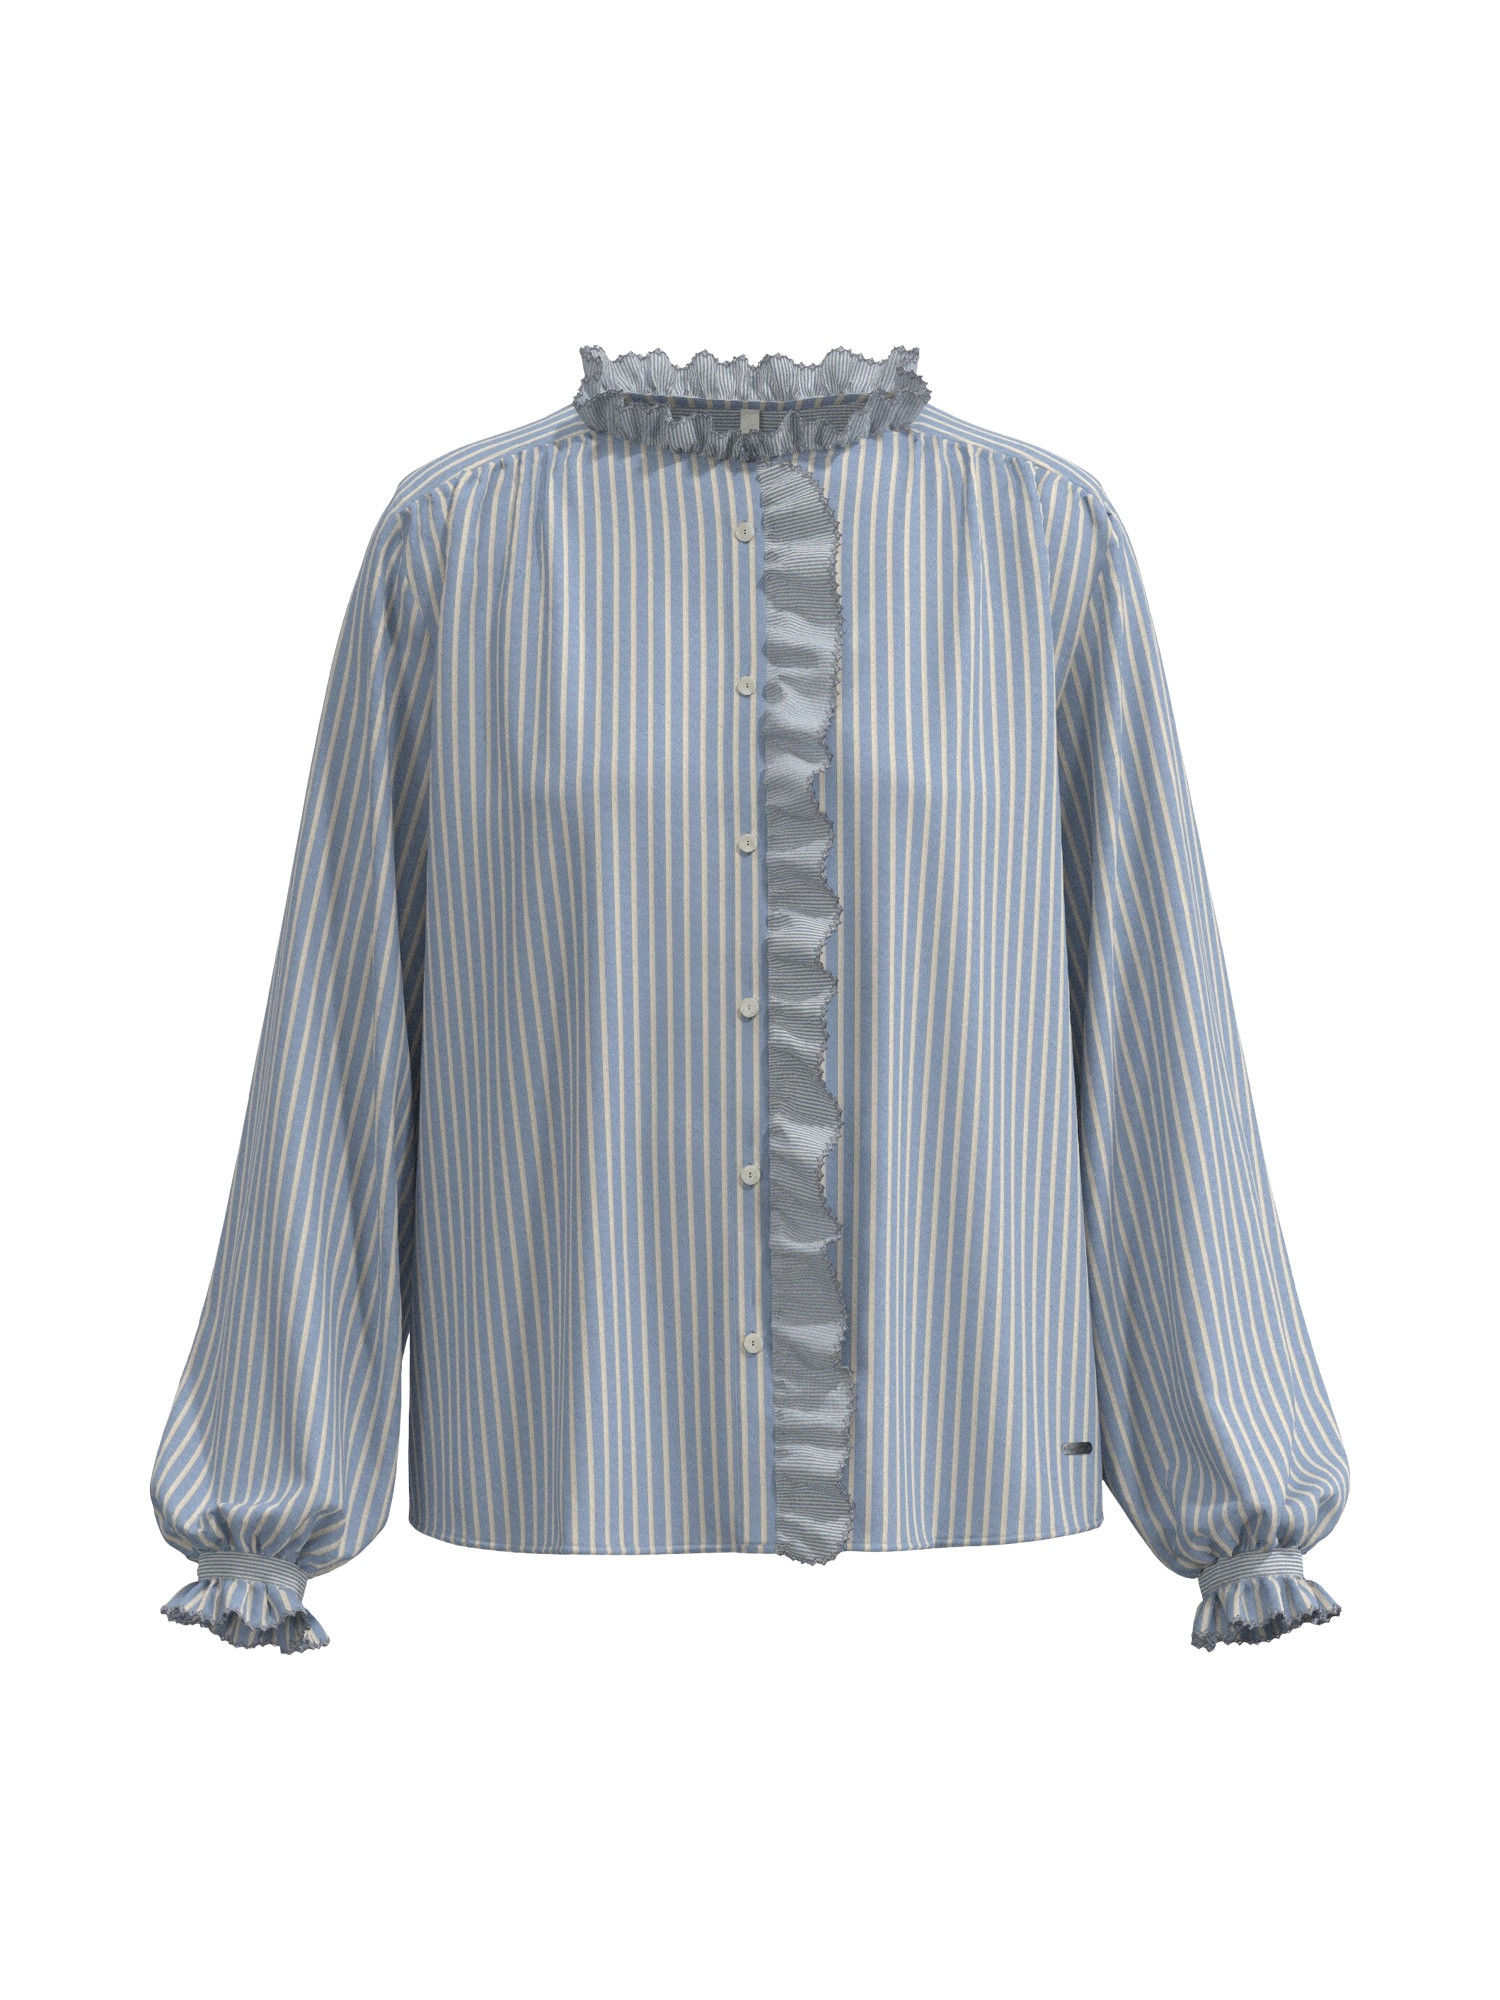 Pepe Jeans -  Camicia a righe in cotone, Azzurro, large image number 0